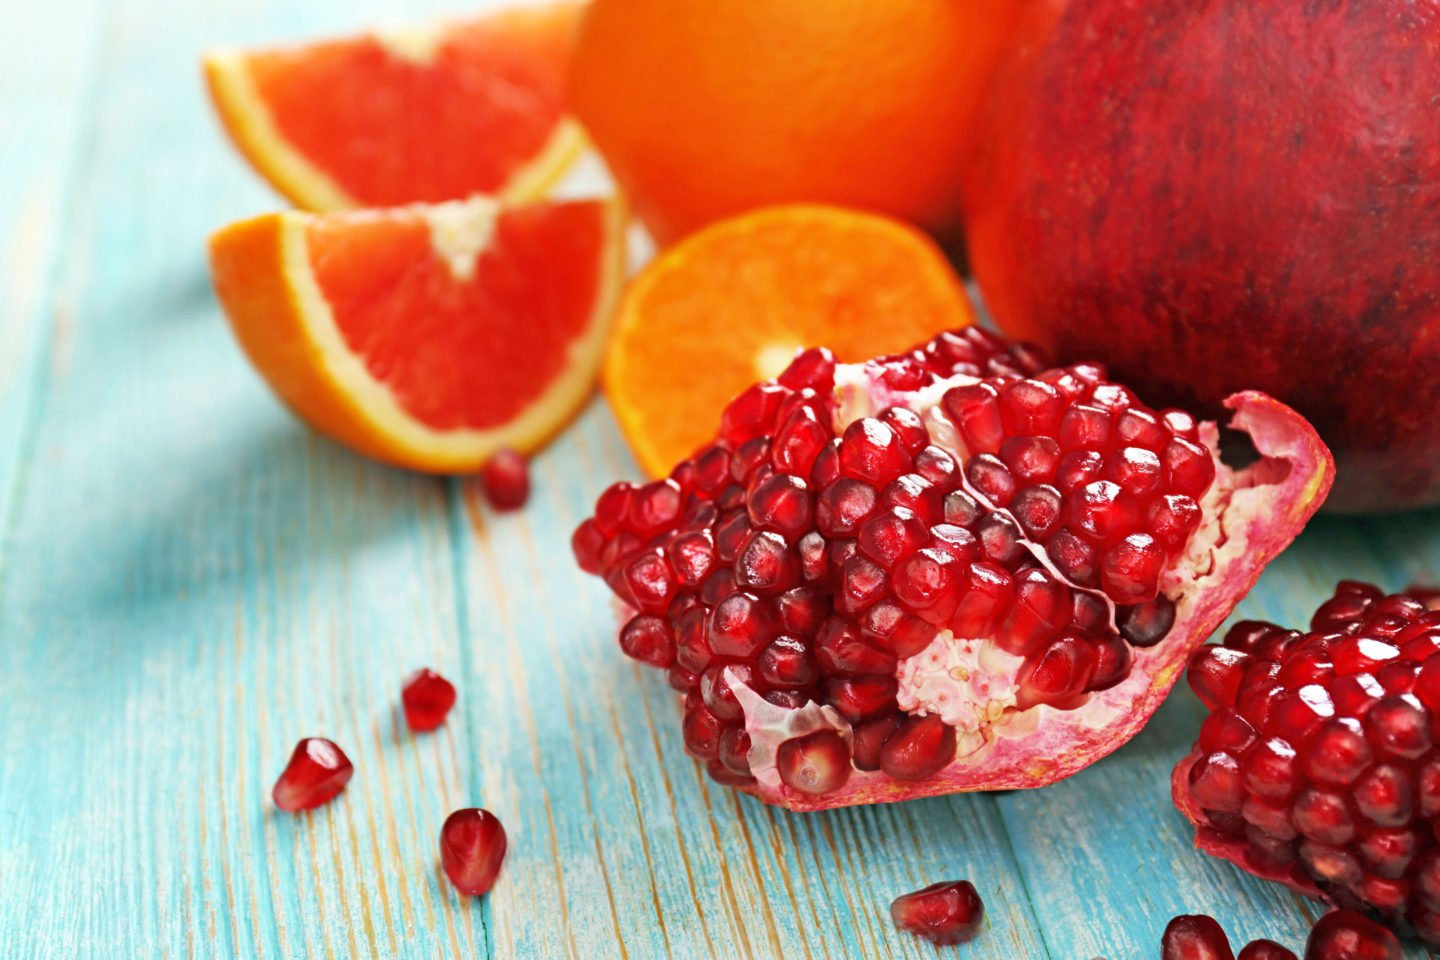 pomegranate seeds and whole fruit with citrus fruits in the background